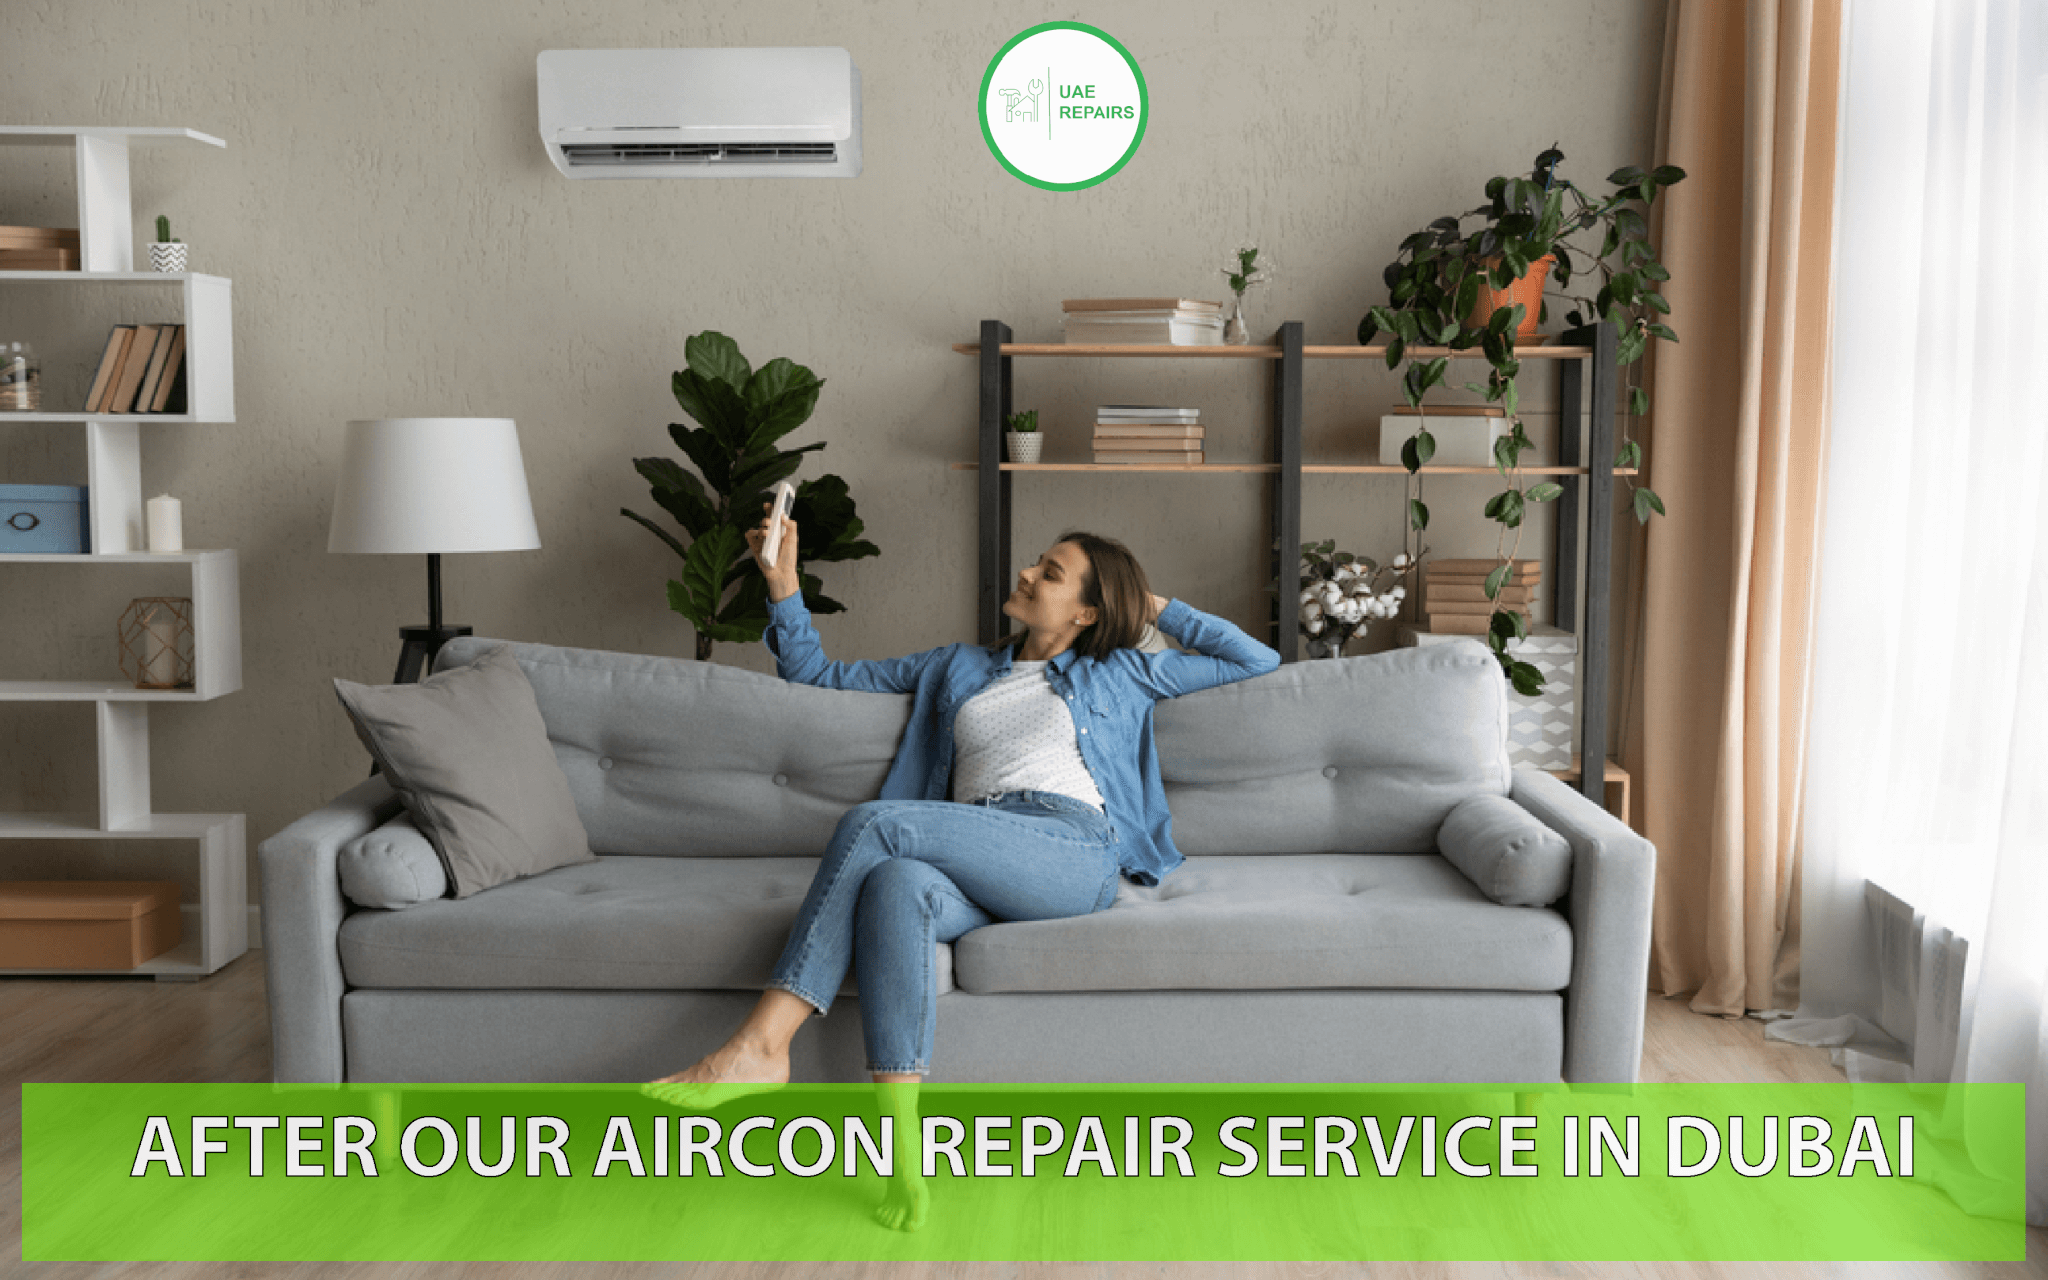 What to Expect After Our Aircon Repair Service